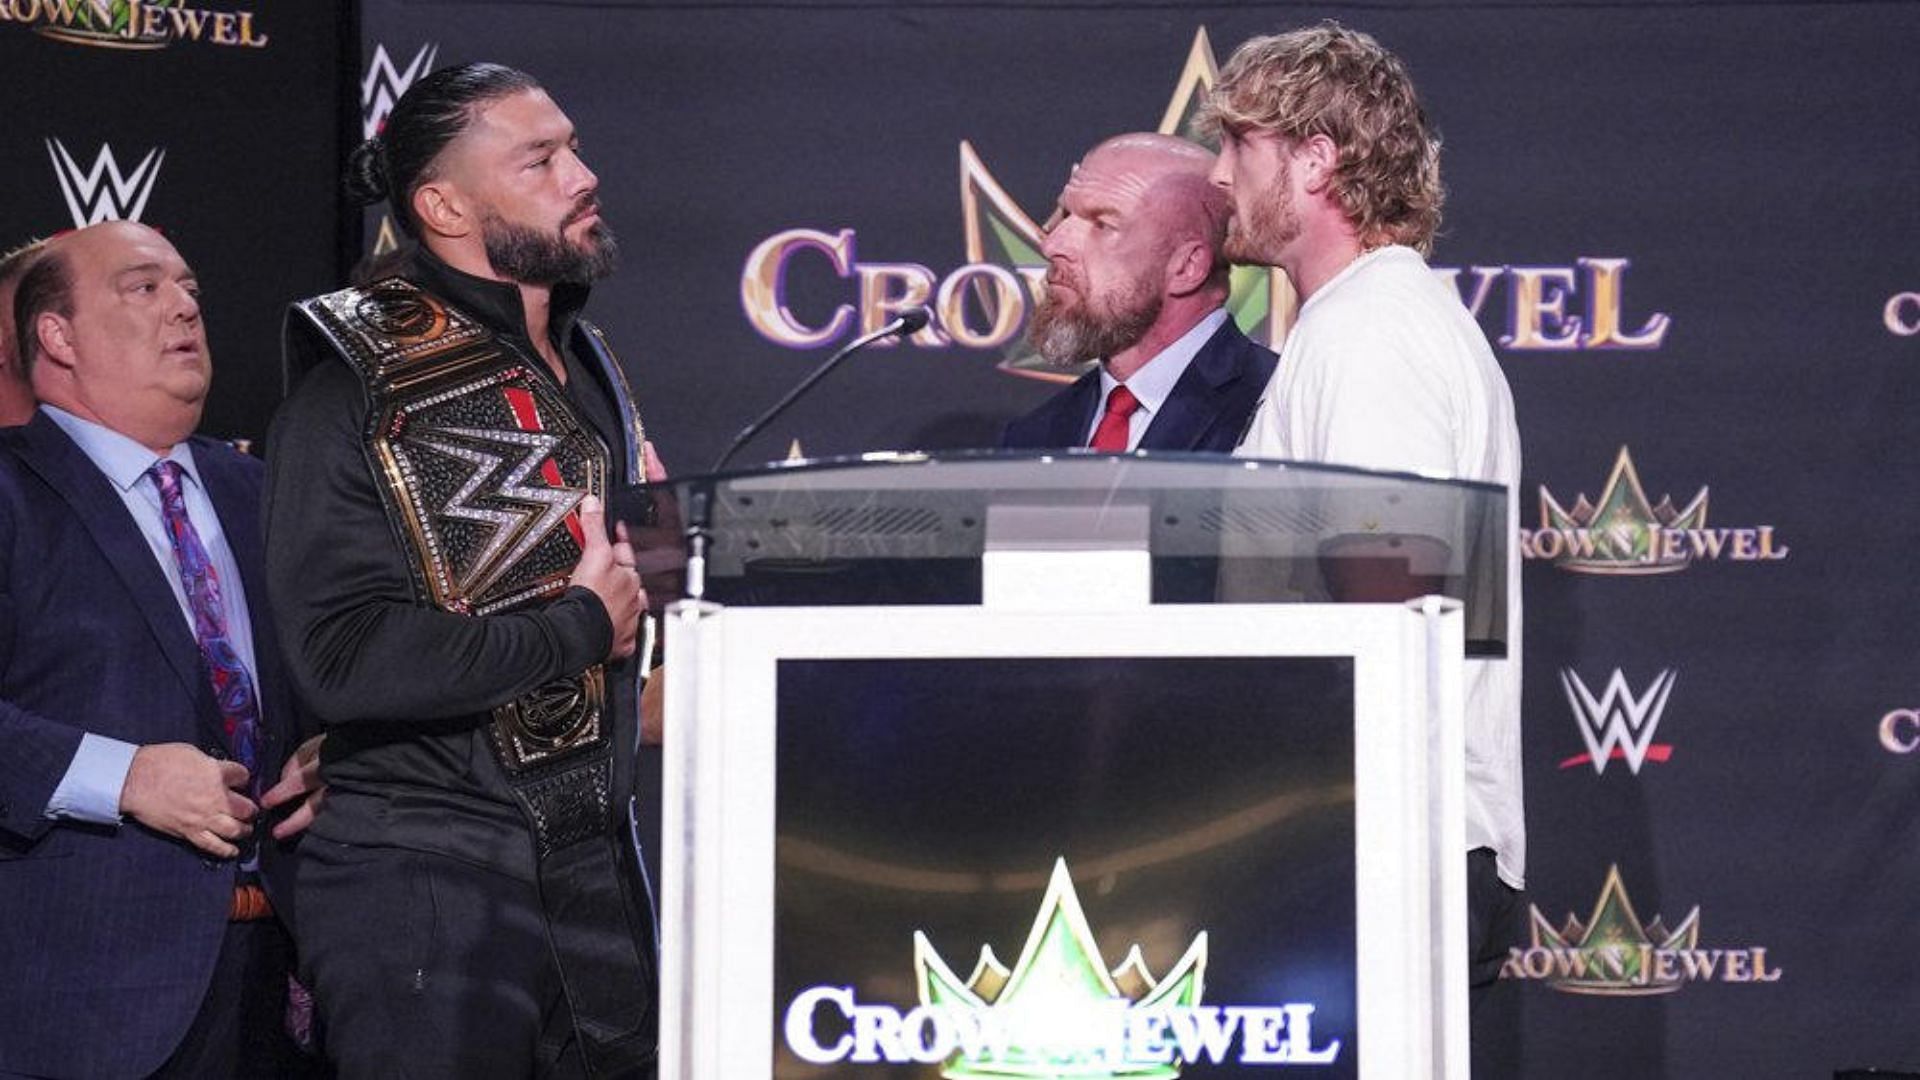 Roman Reigns will defend his titles against Logan Paul at Crown Jewel